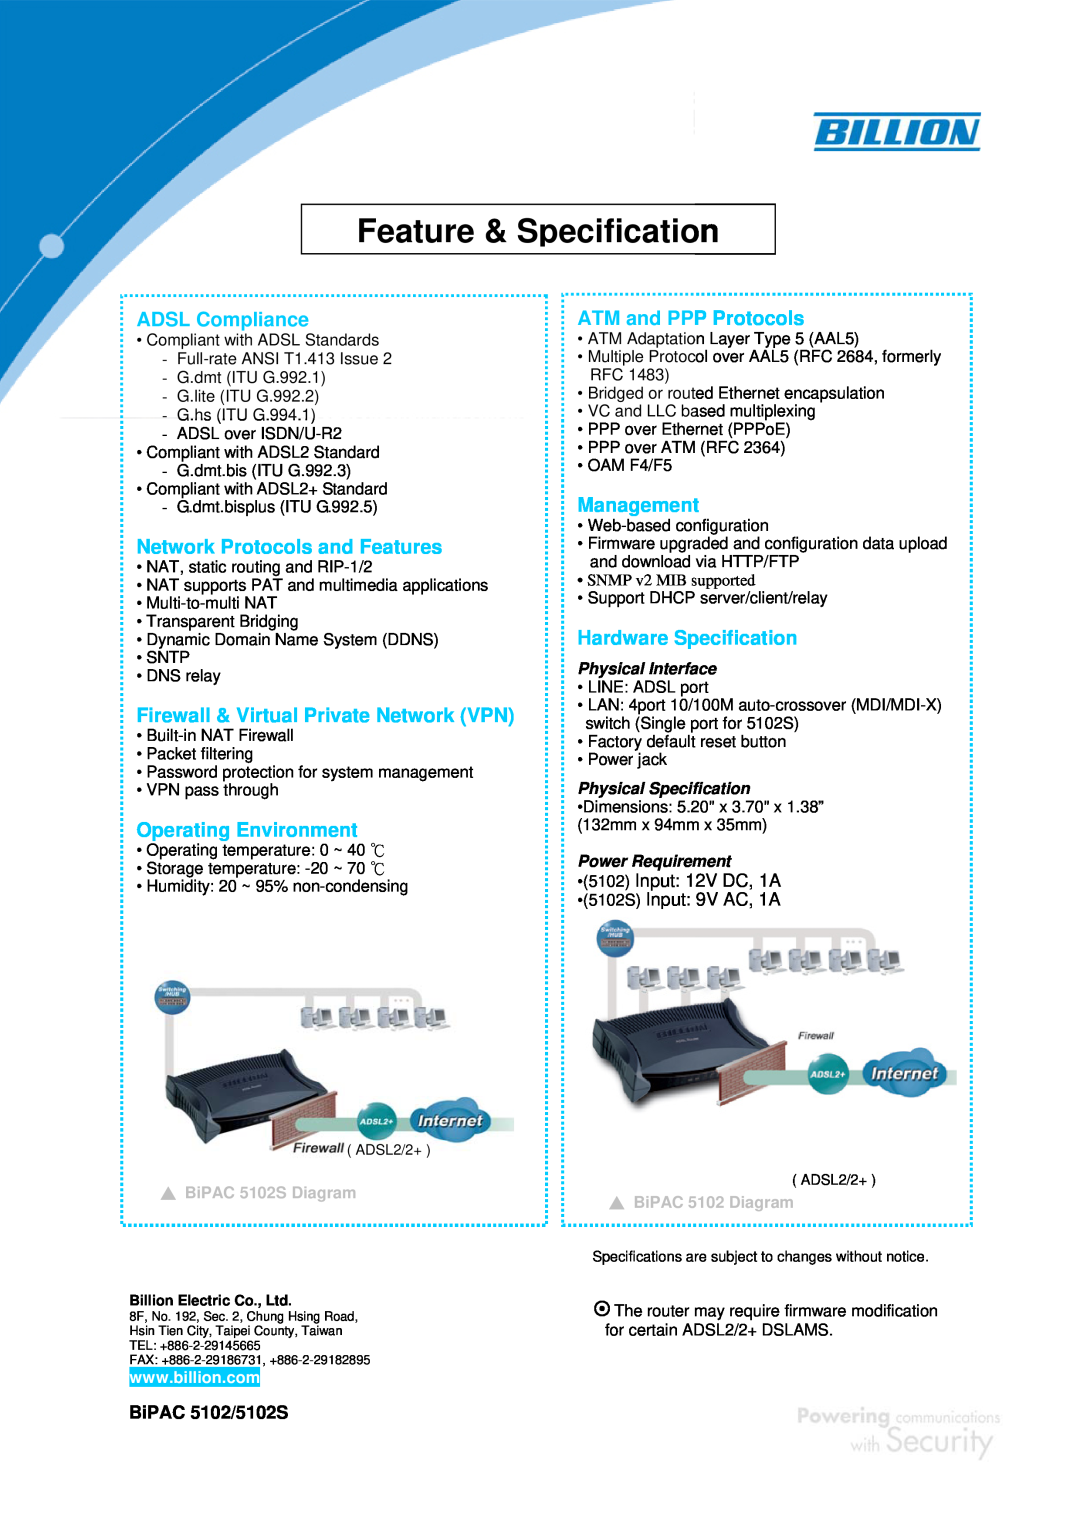 Billion Electric Company BIPAC 5102S Feature & Specification, ADSL Compliance, Network Protocols and Features, Management 